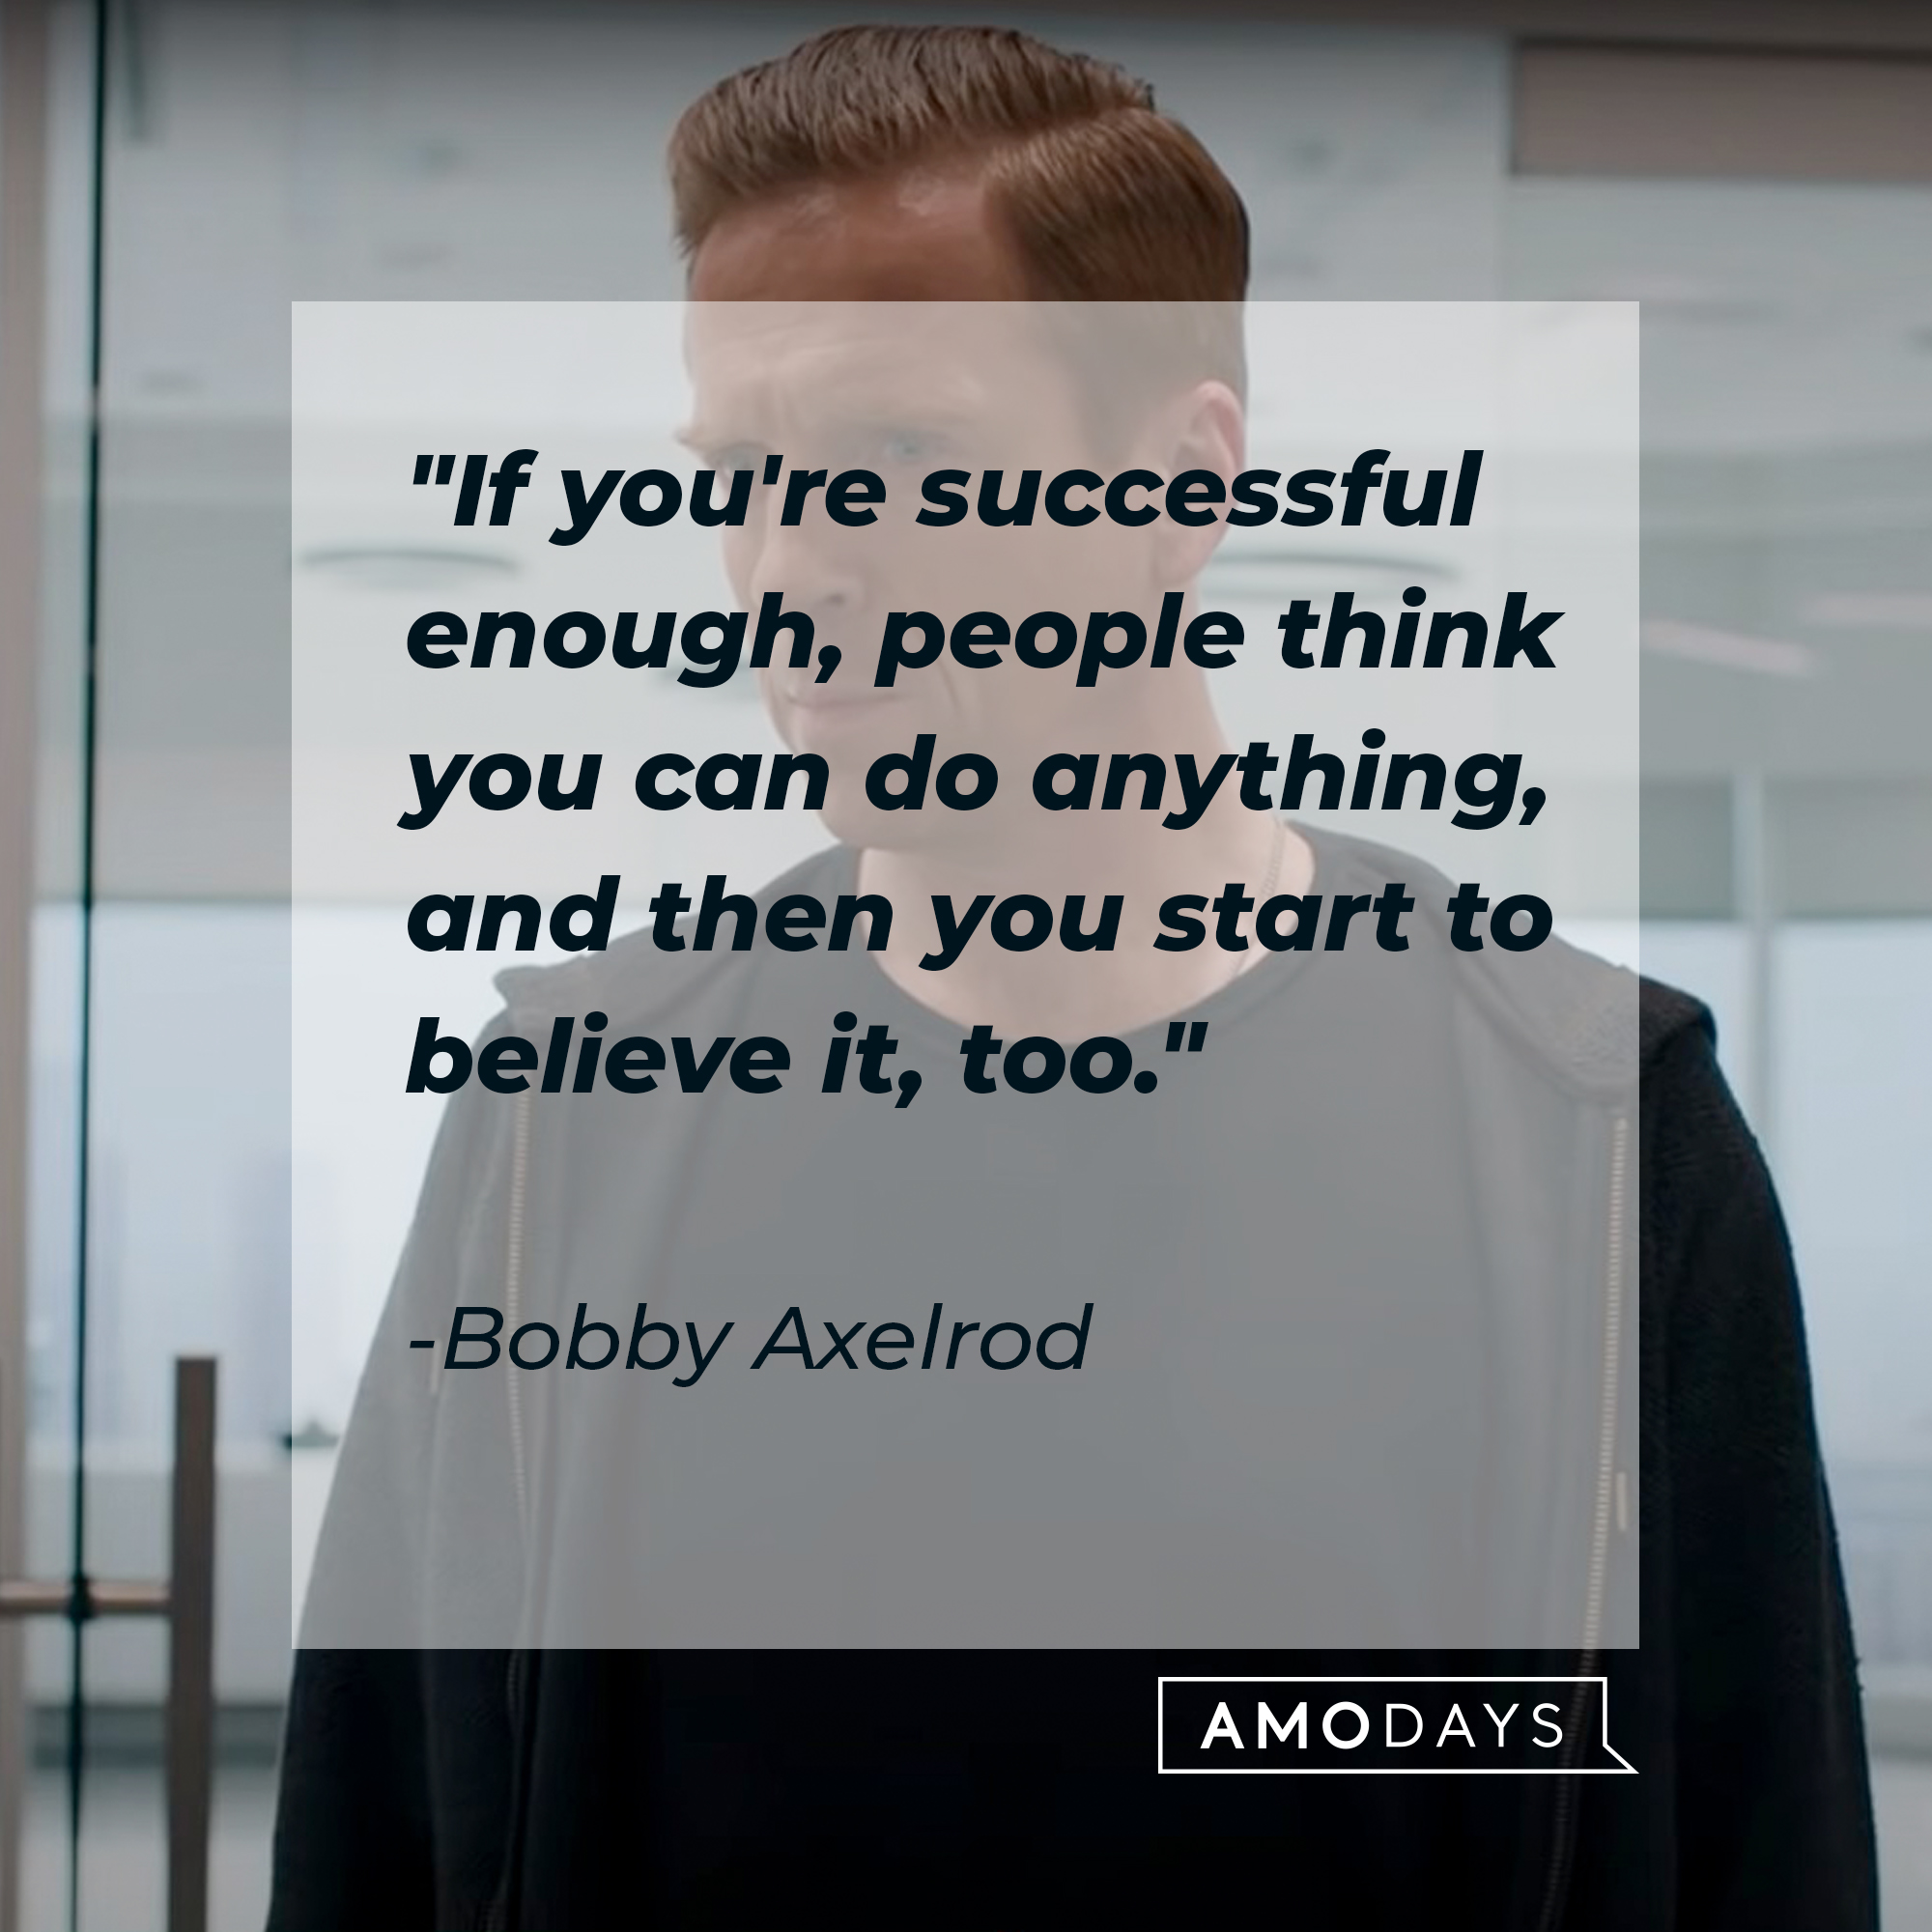 Bobby Axelrod's quote: "If you're successful enough, people think you can do anything, and then you start to believe it, too." | Source: Youtube.com/BillionsOnShowtime